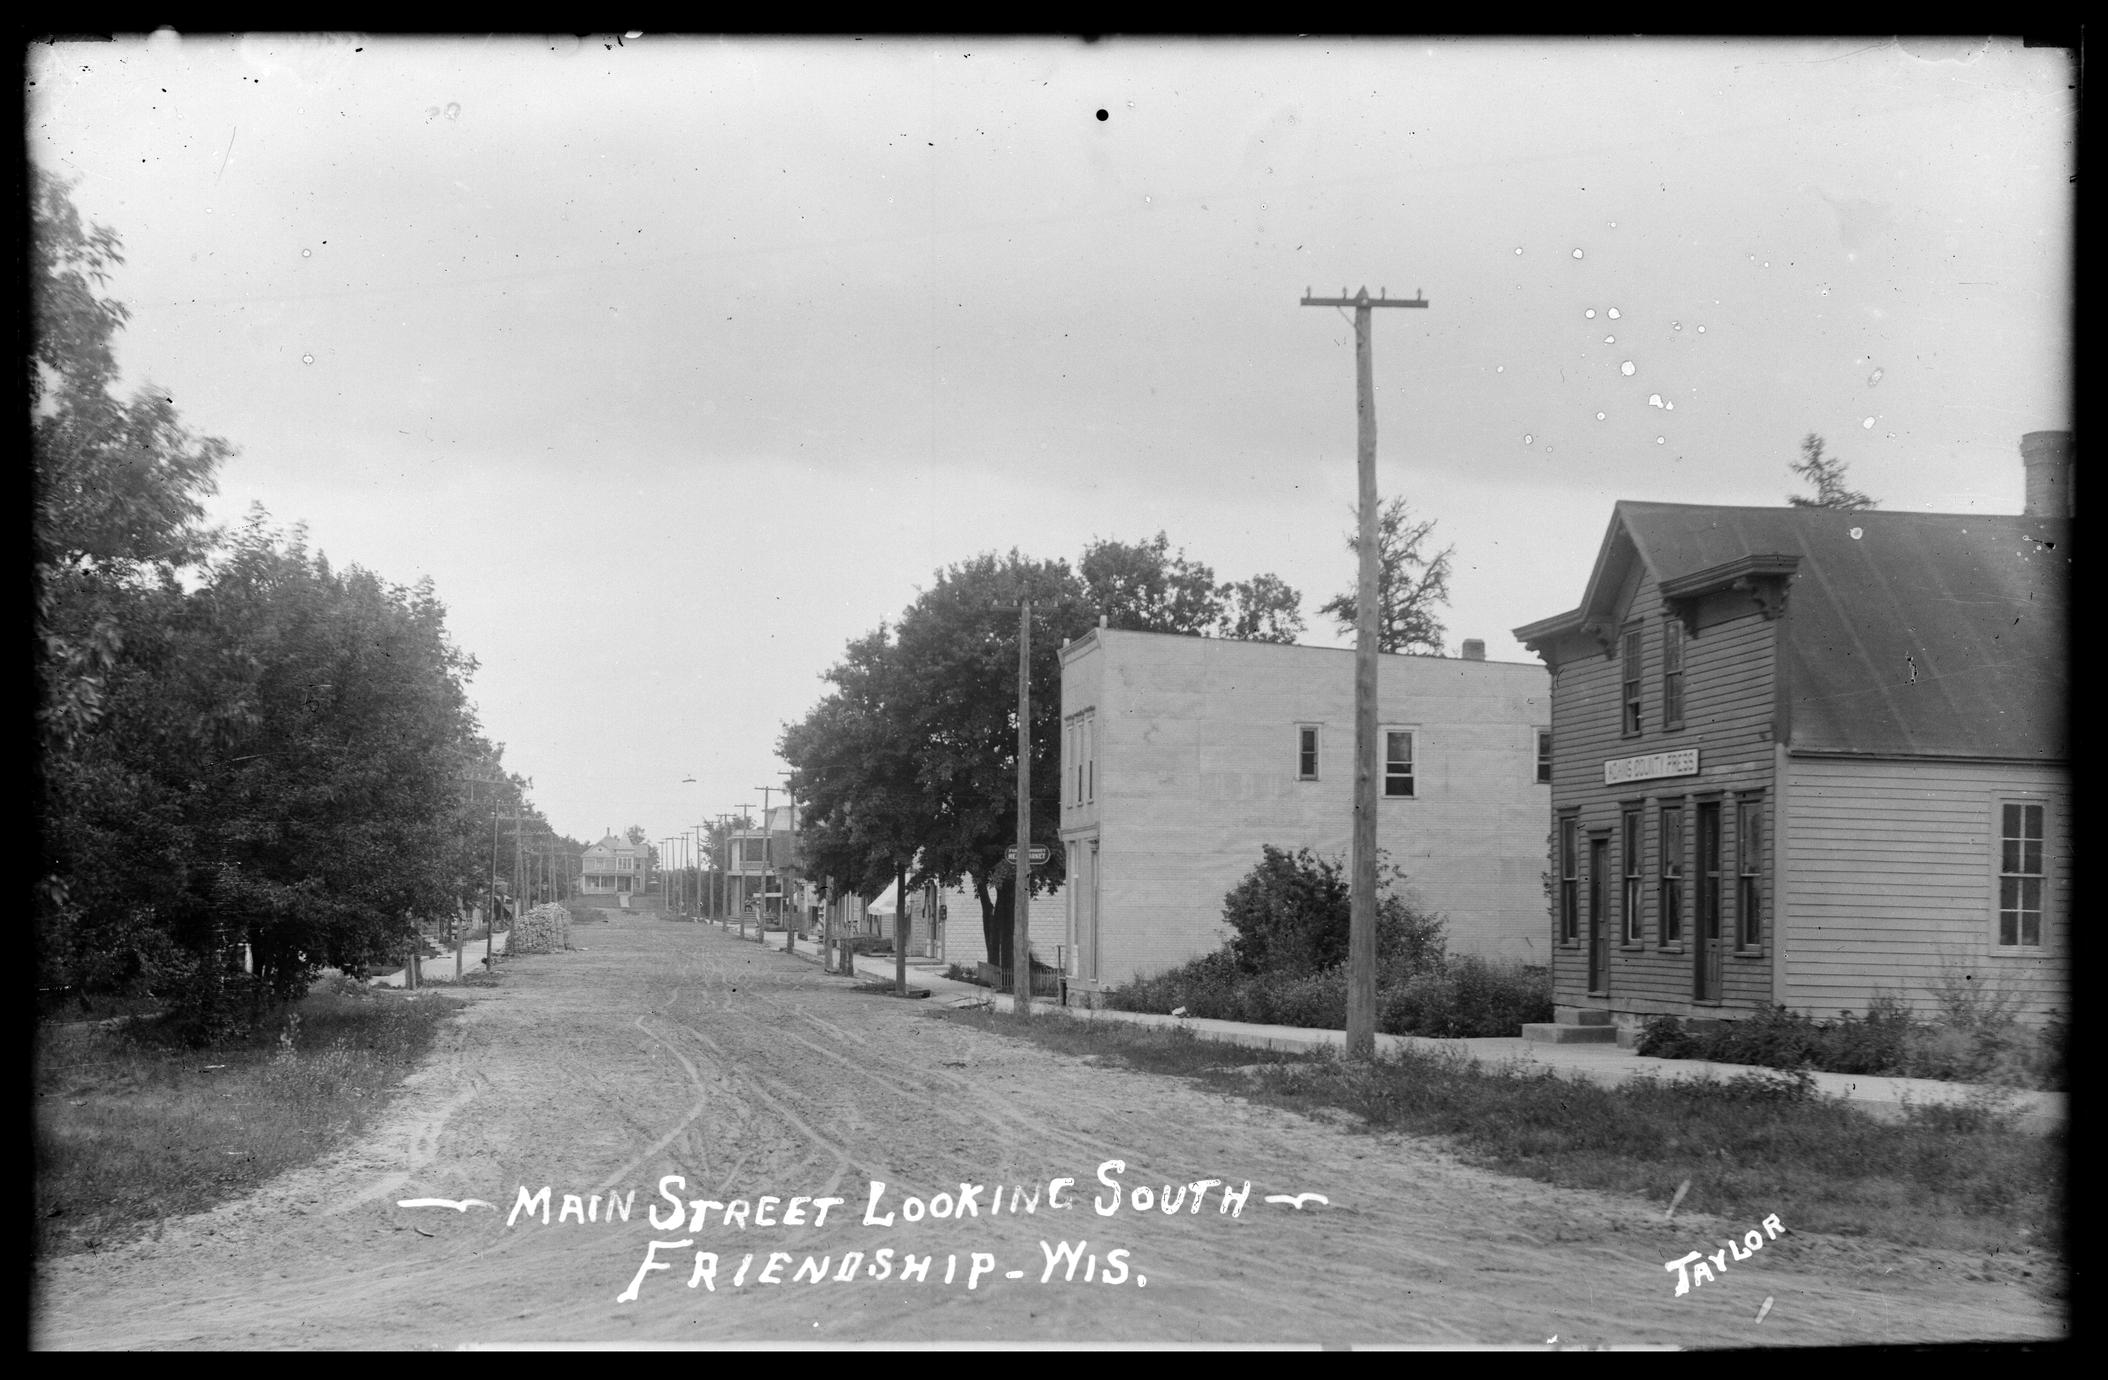 Main Street looking south, Friendship, Wis.